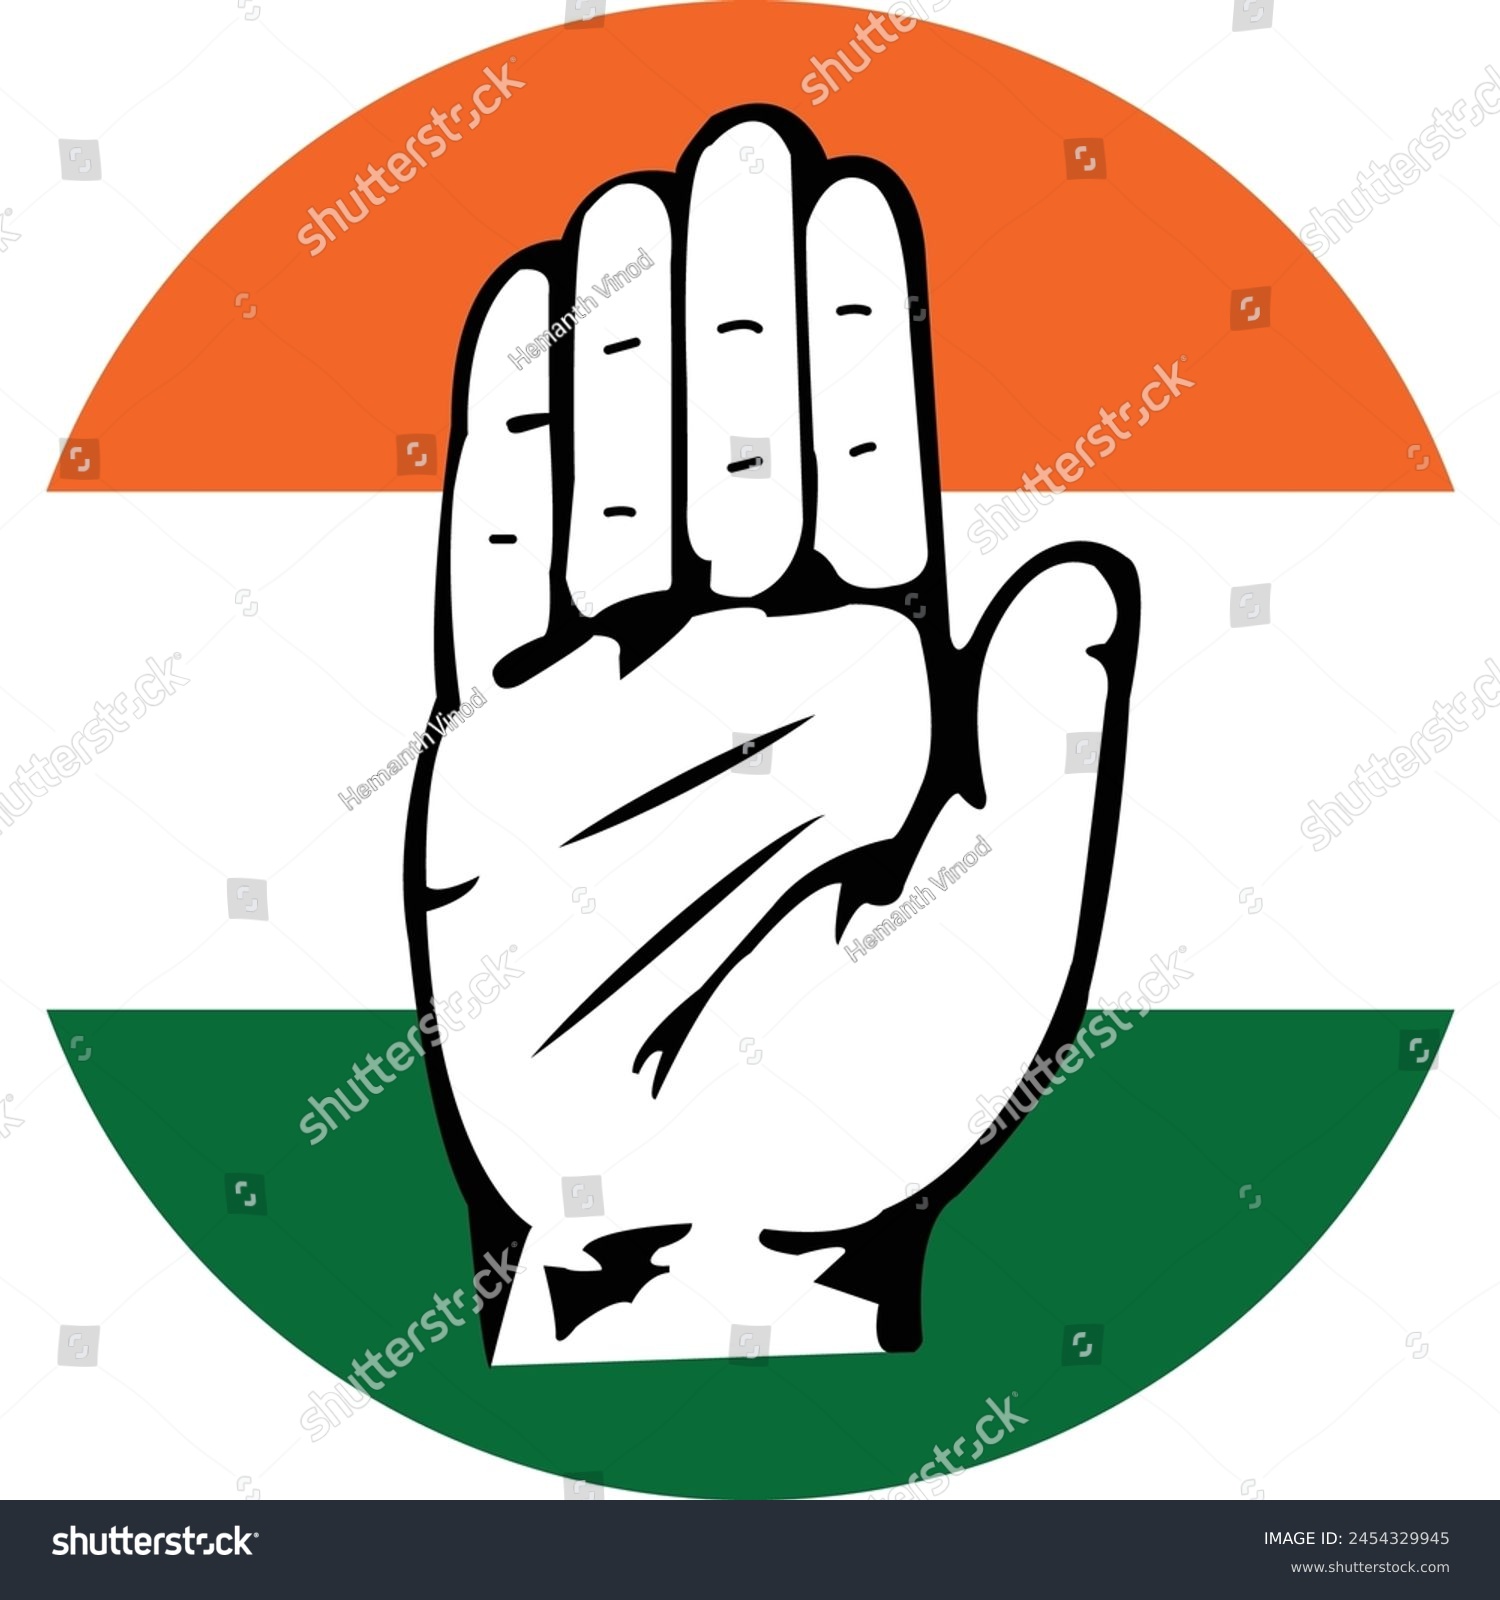 SVG of Udf congress party logo with palm of the hand and tricolour flag behind vector  svg